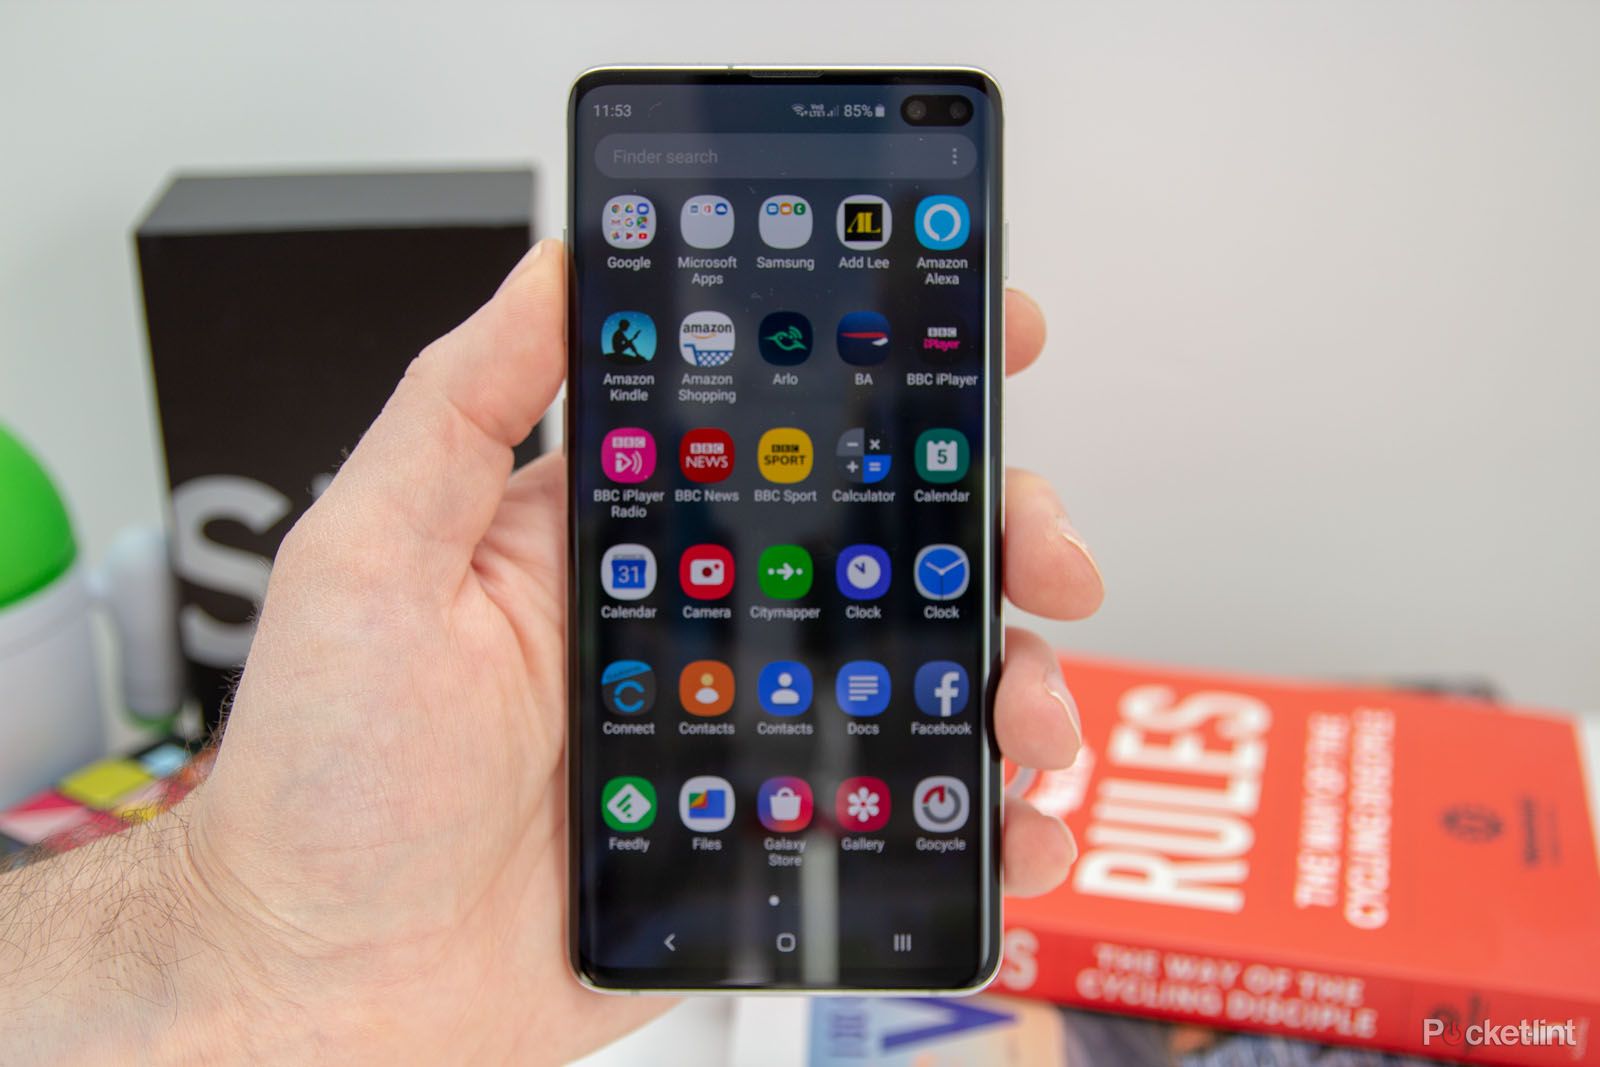 Samsung Galaxy S10 Tips And Tricks image 3